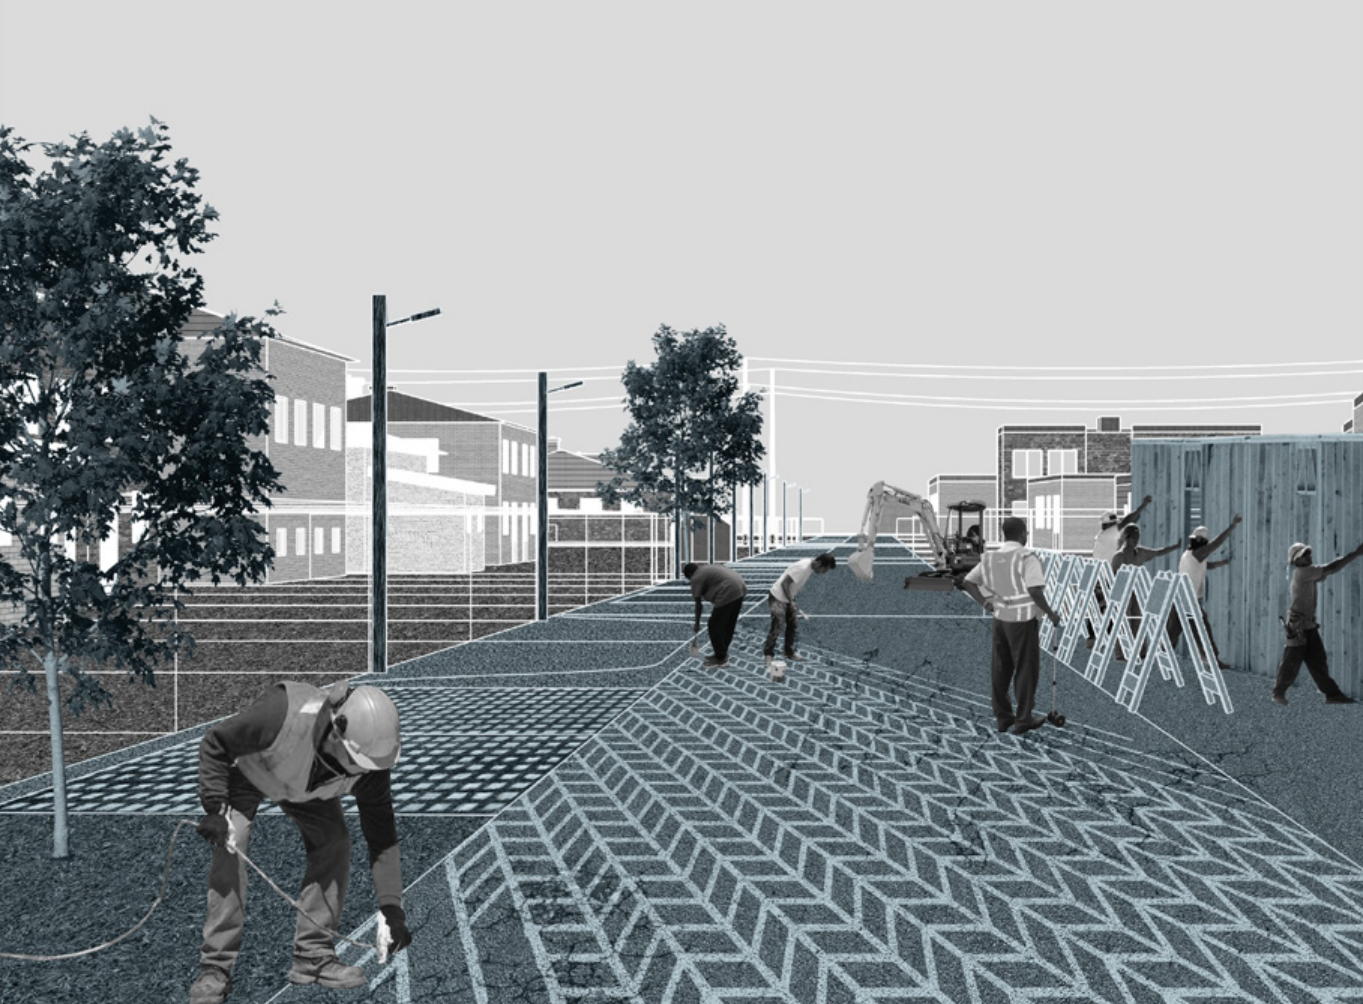 thesis image - workers on street